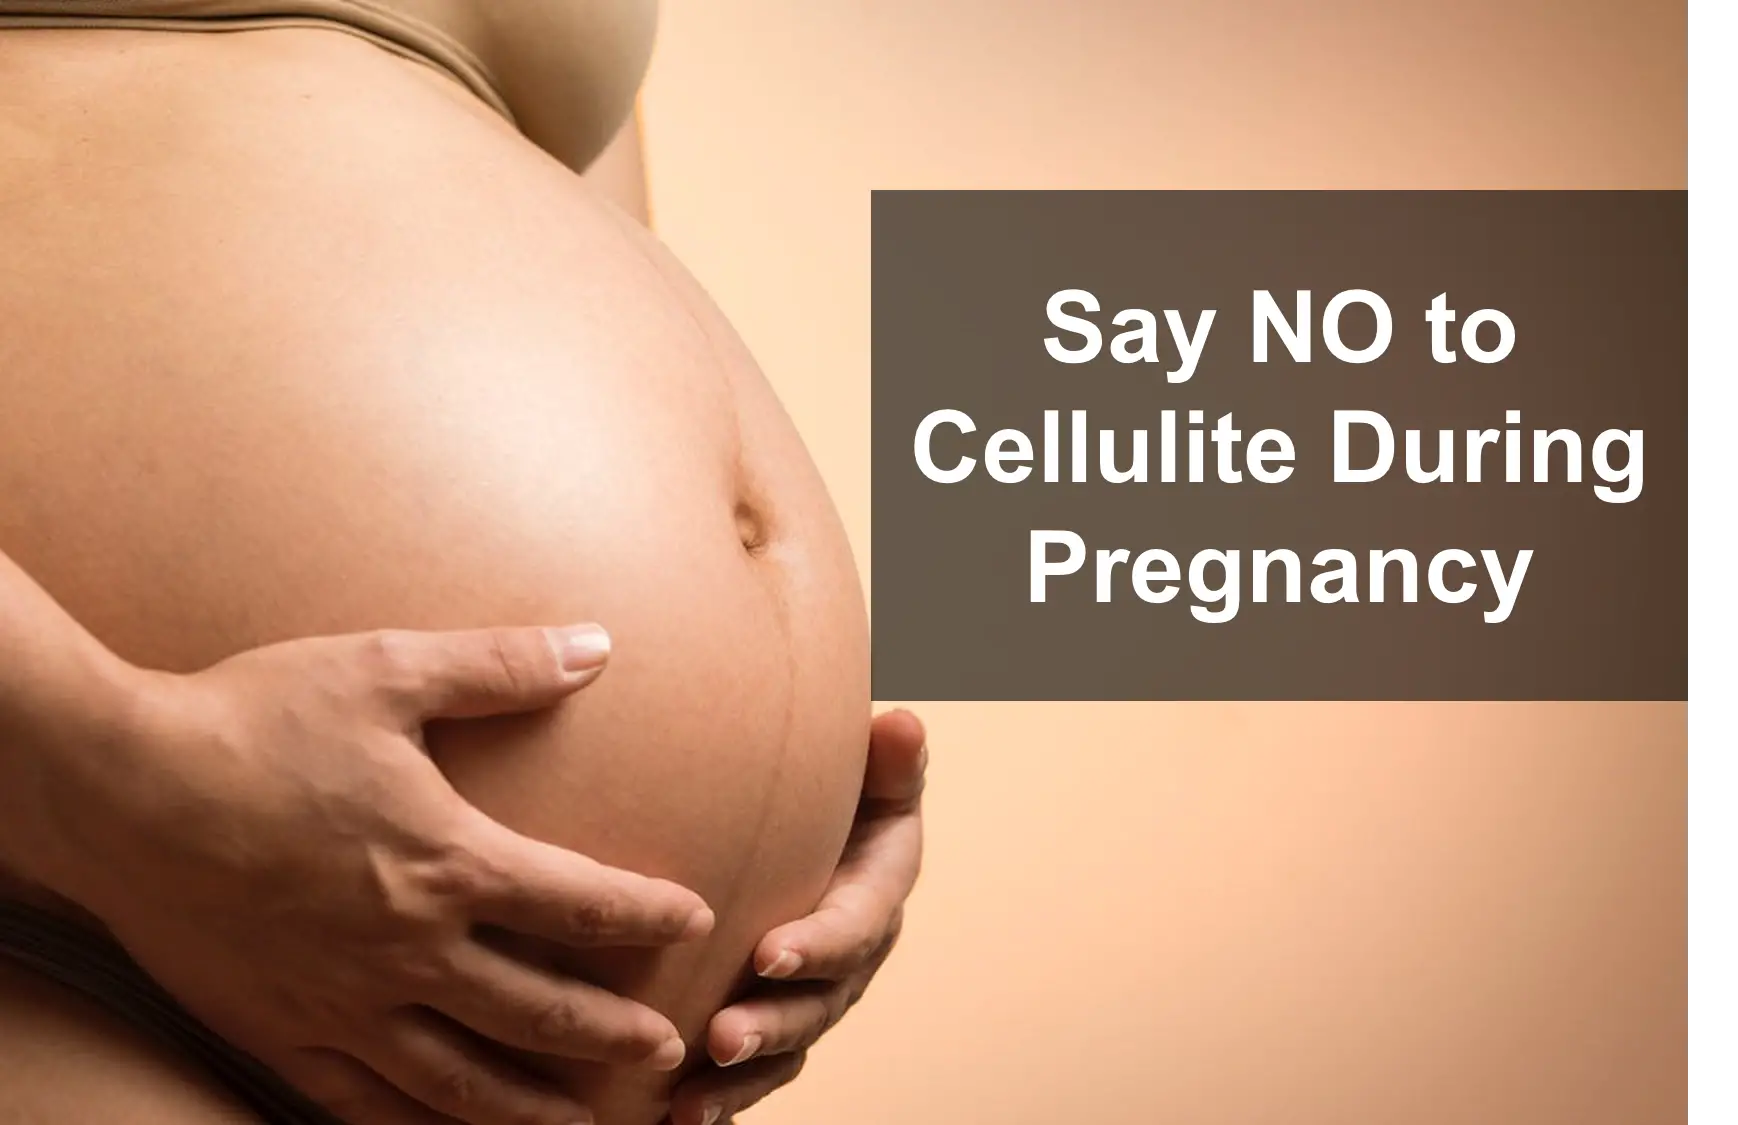 Remove Cellulite Even When You Are Pregnant...can be done!